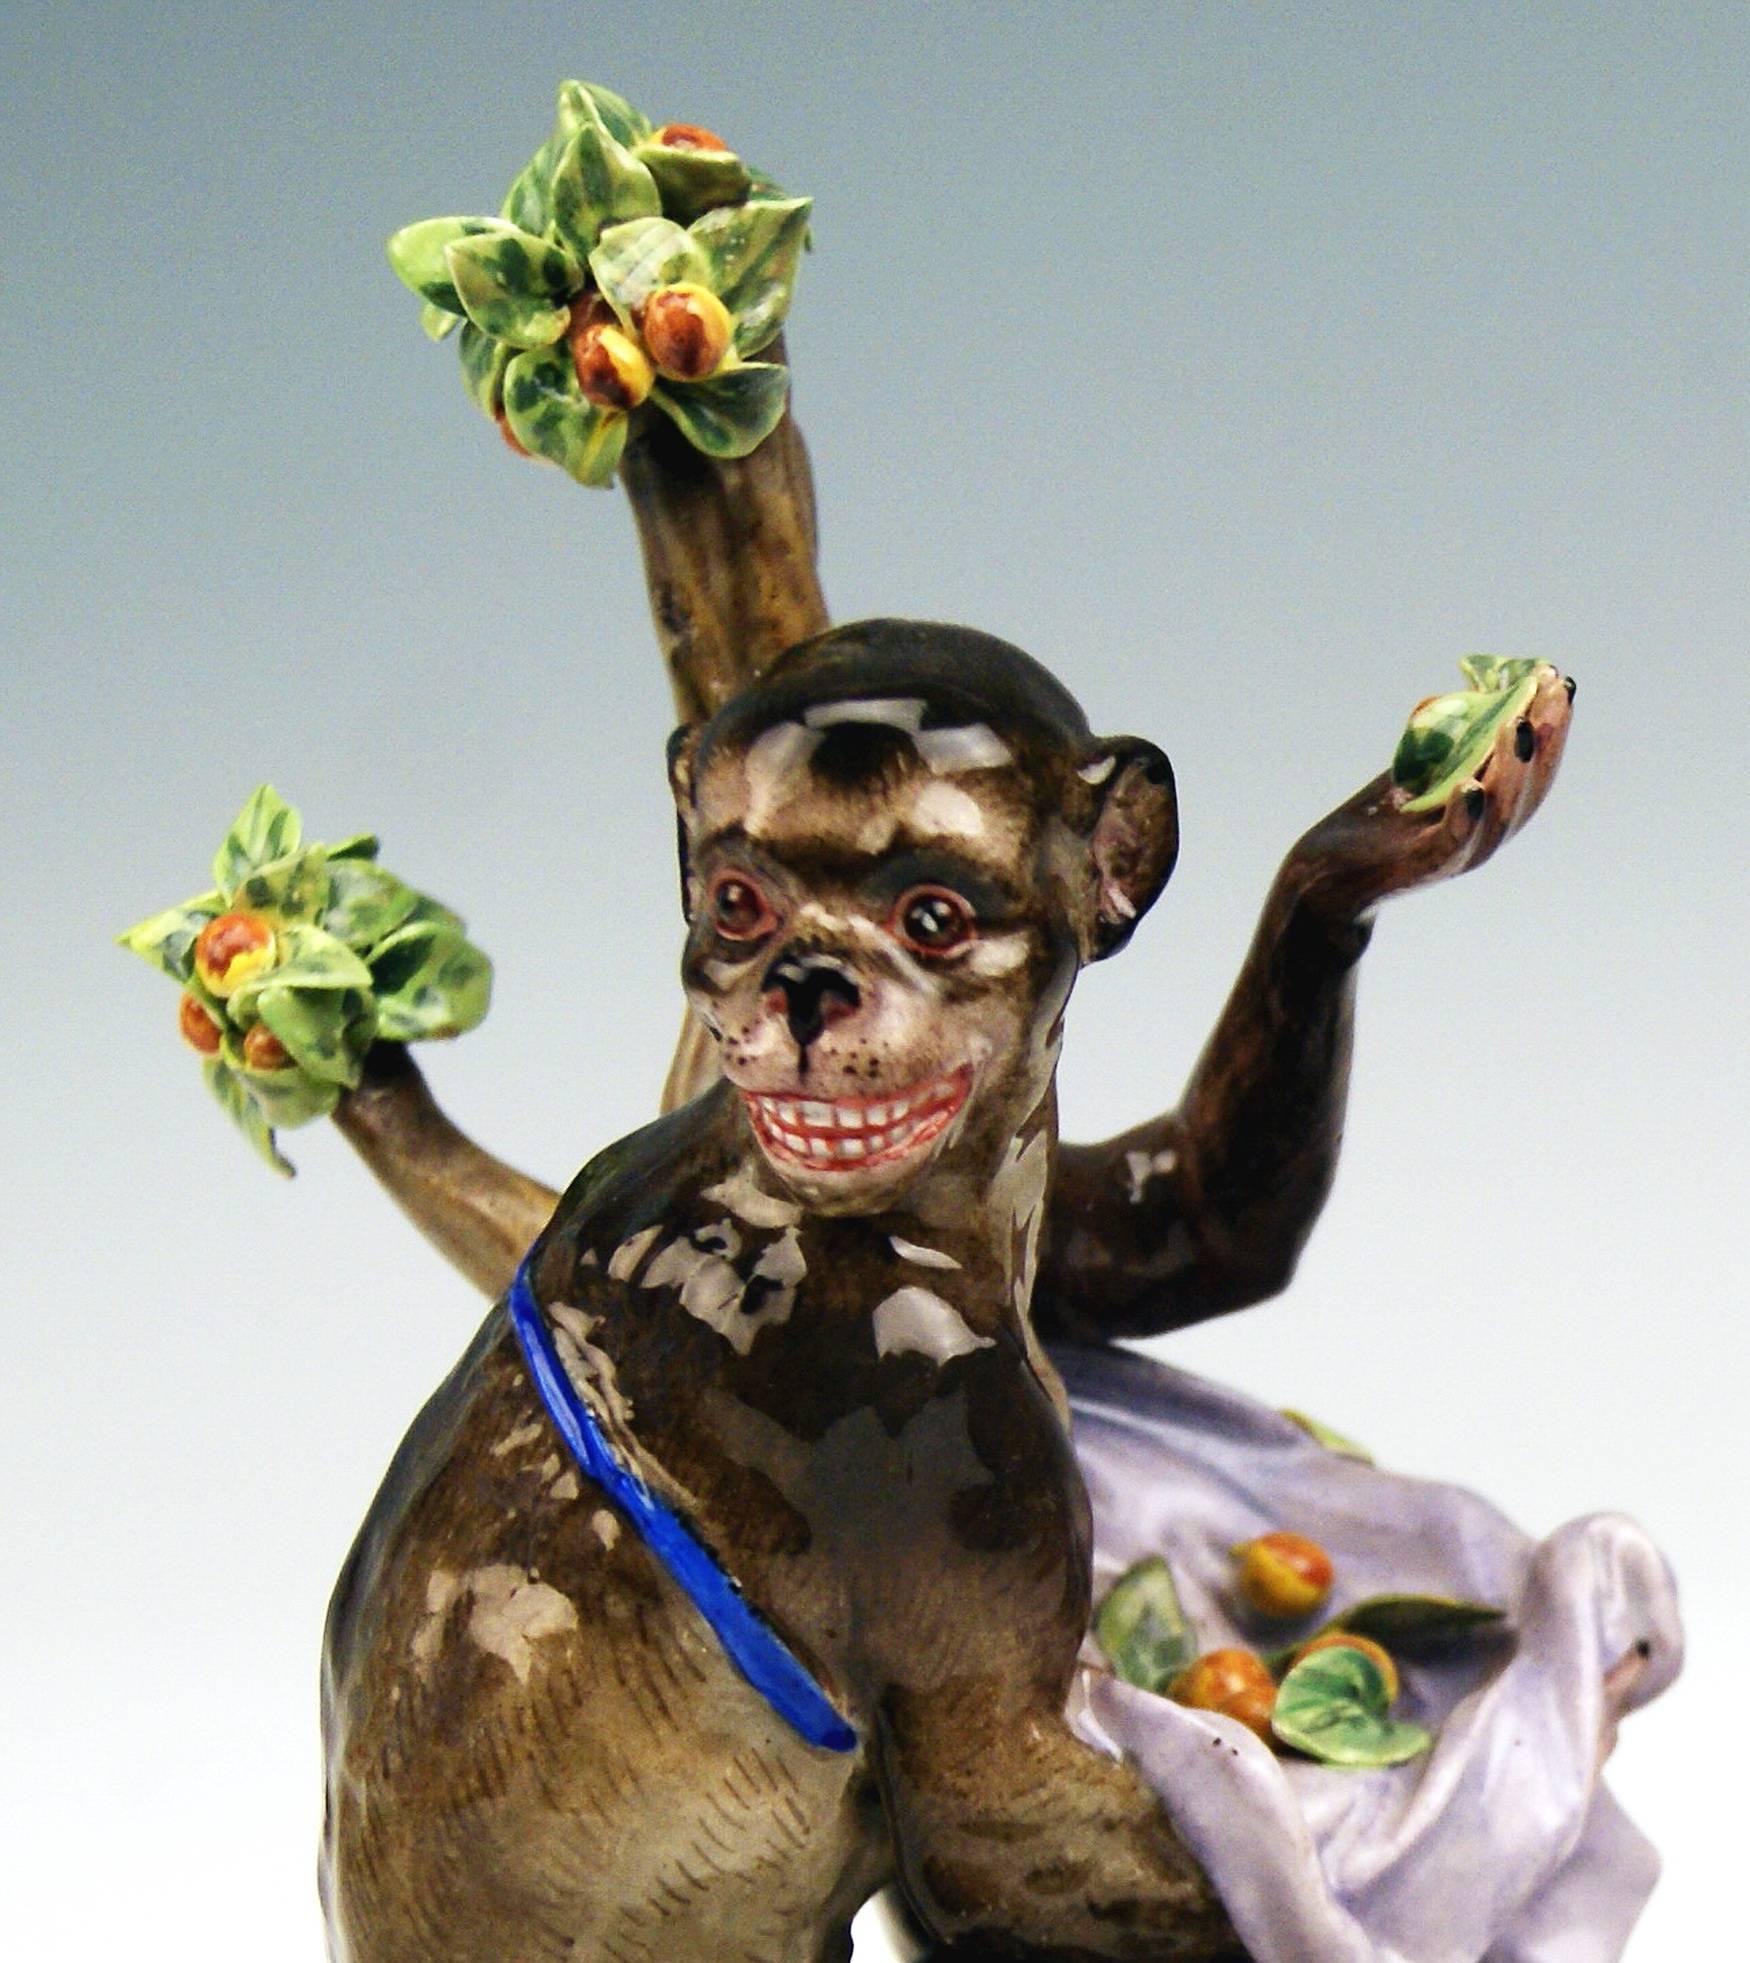 Rococo Pair Meissen Nicest Monkey Figurines by Kaendler Models 1464 and 1469, circa 1850